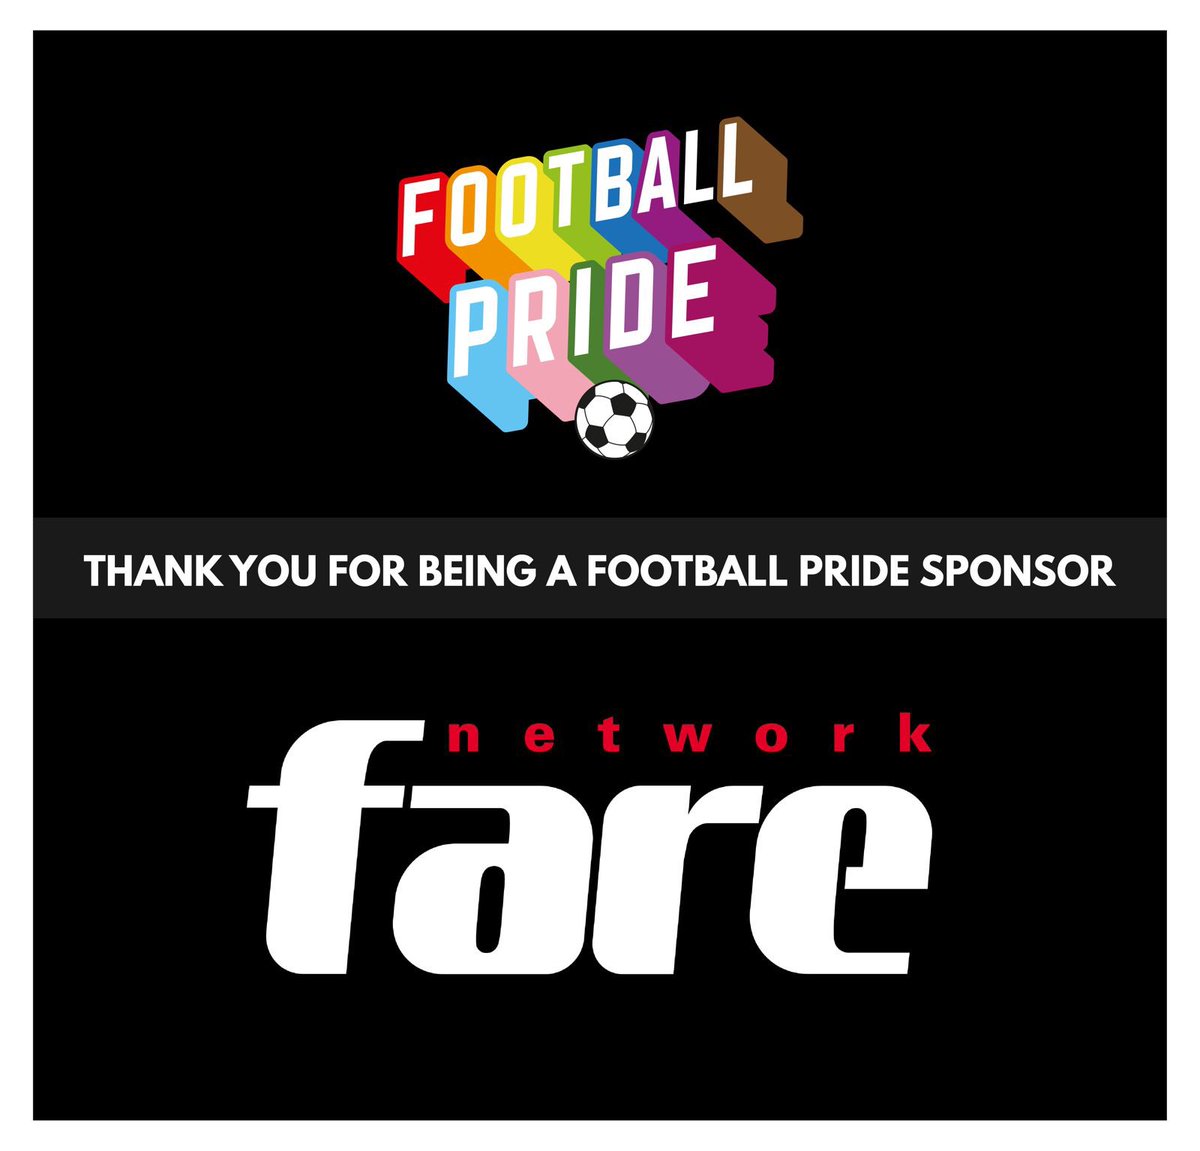 A massive THANK YOU to @farenet for their sponsorship of @FootballPrideUK for a second year & for helping us bring some international content to the day 

Fare is an umbrella organisation that brings together individuals, groups & organisations to combat inequality in football 🤝